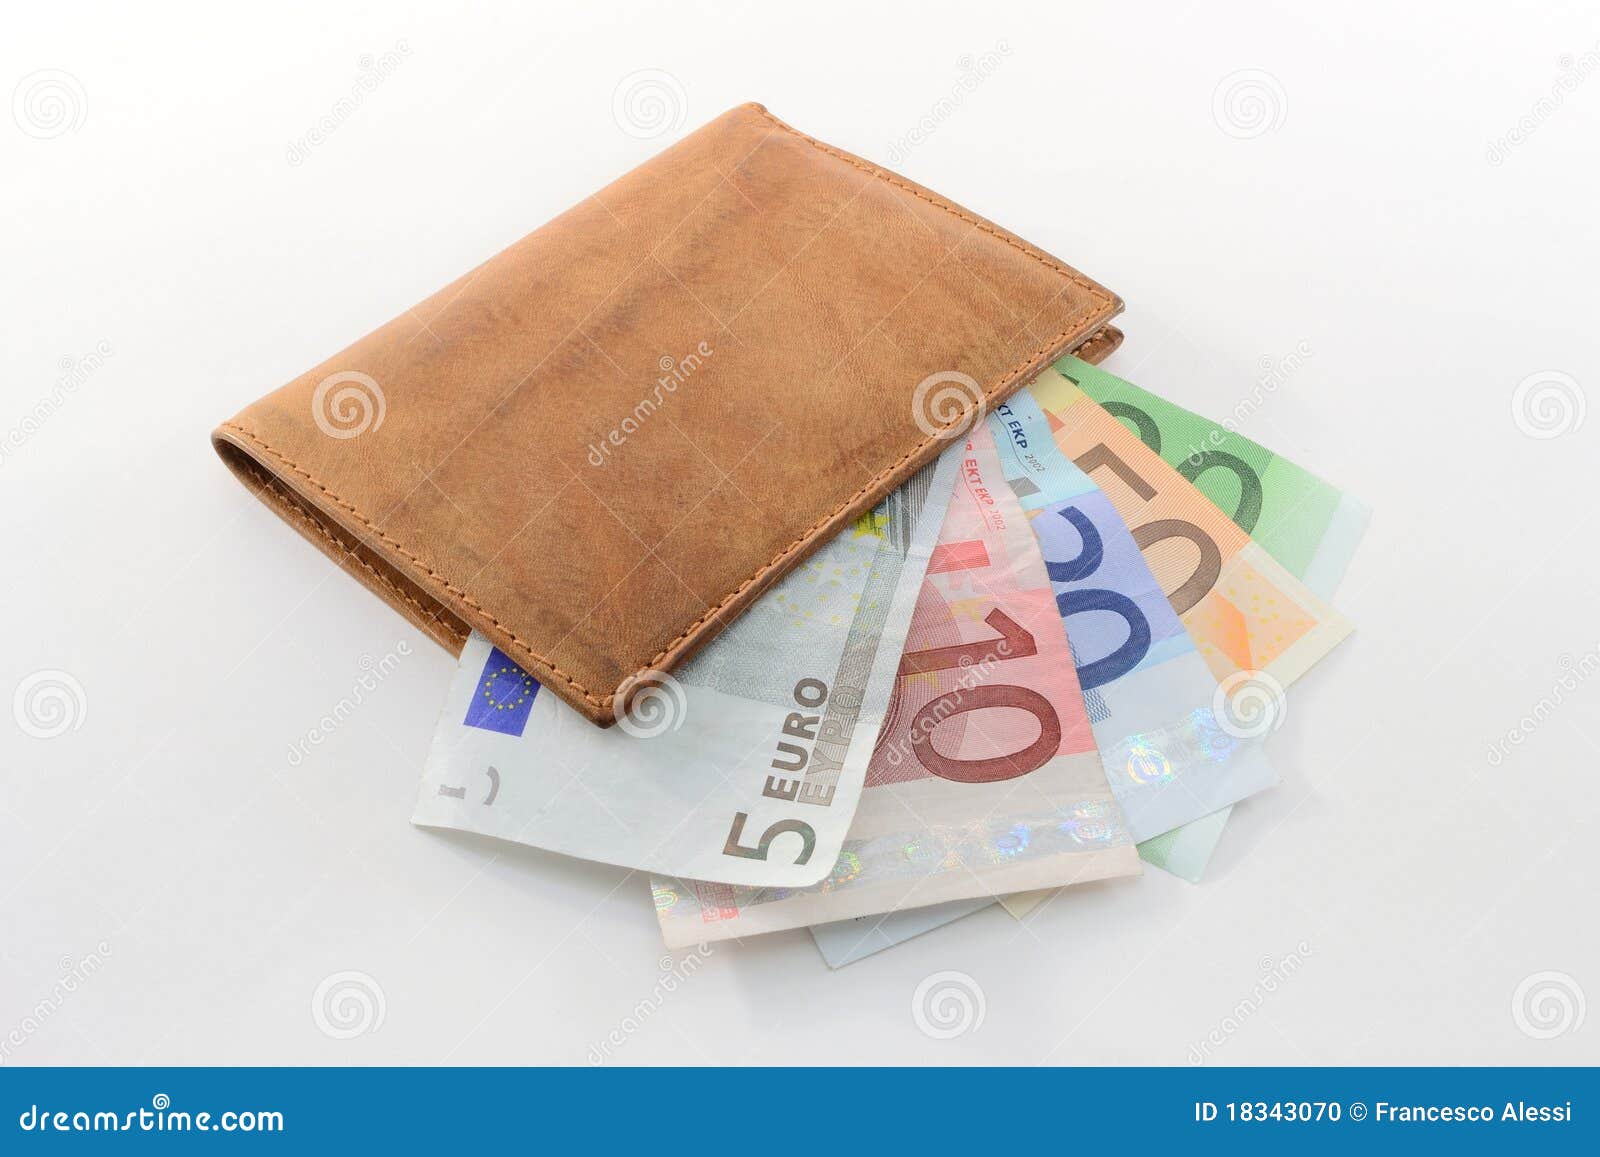 Wallet with euro banknotes stock photo. Image of leather - 18343070